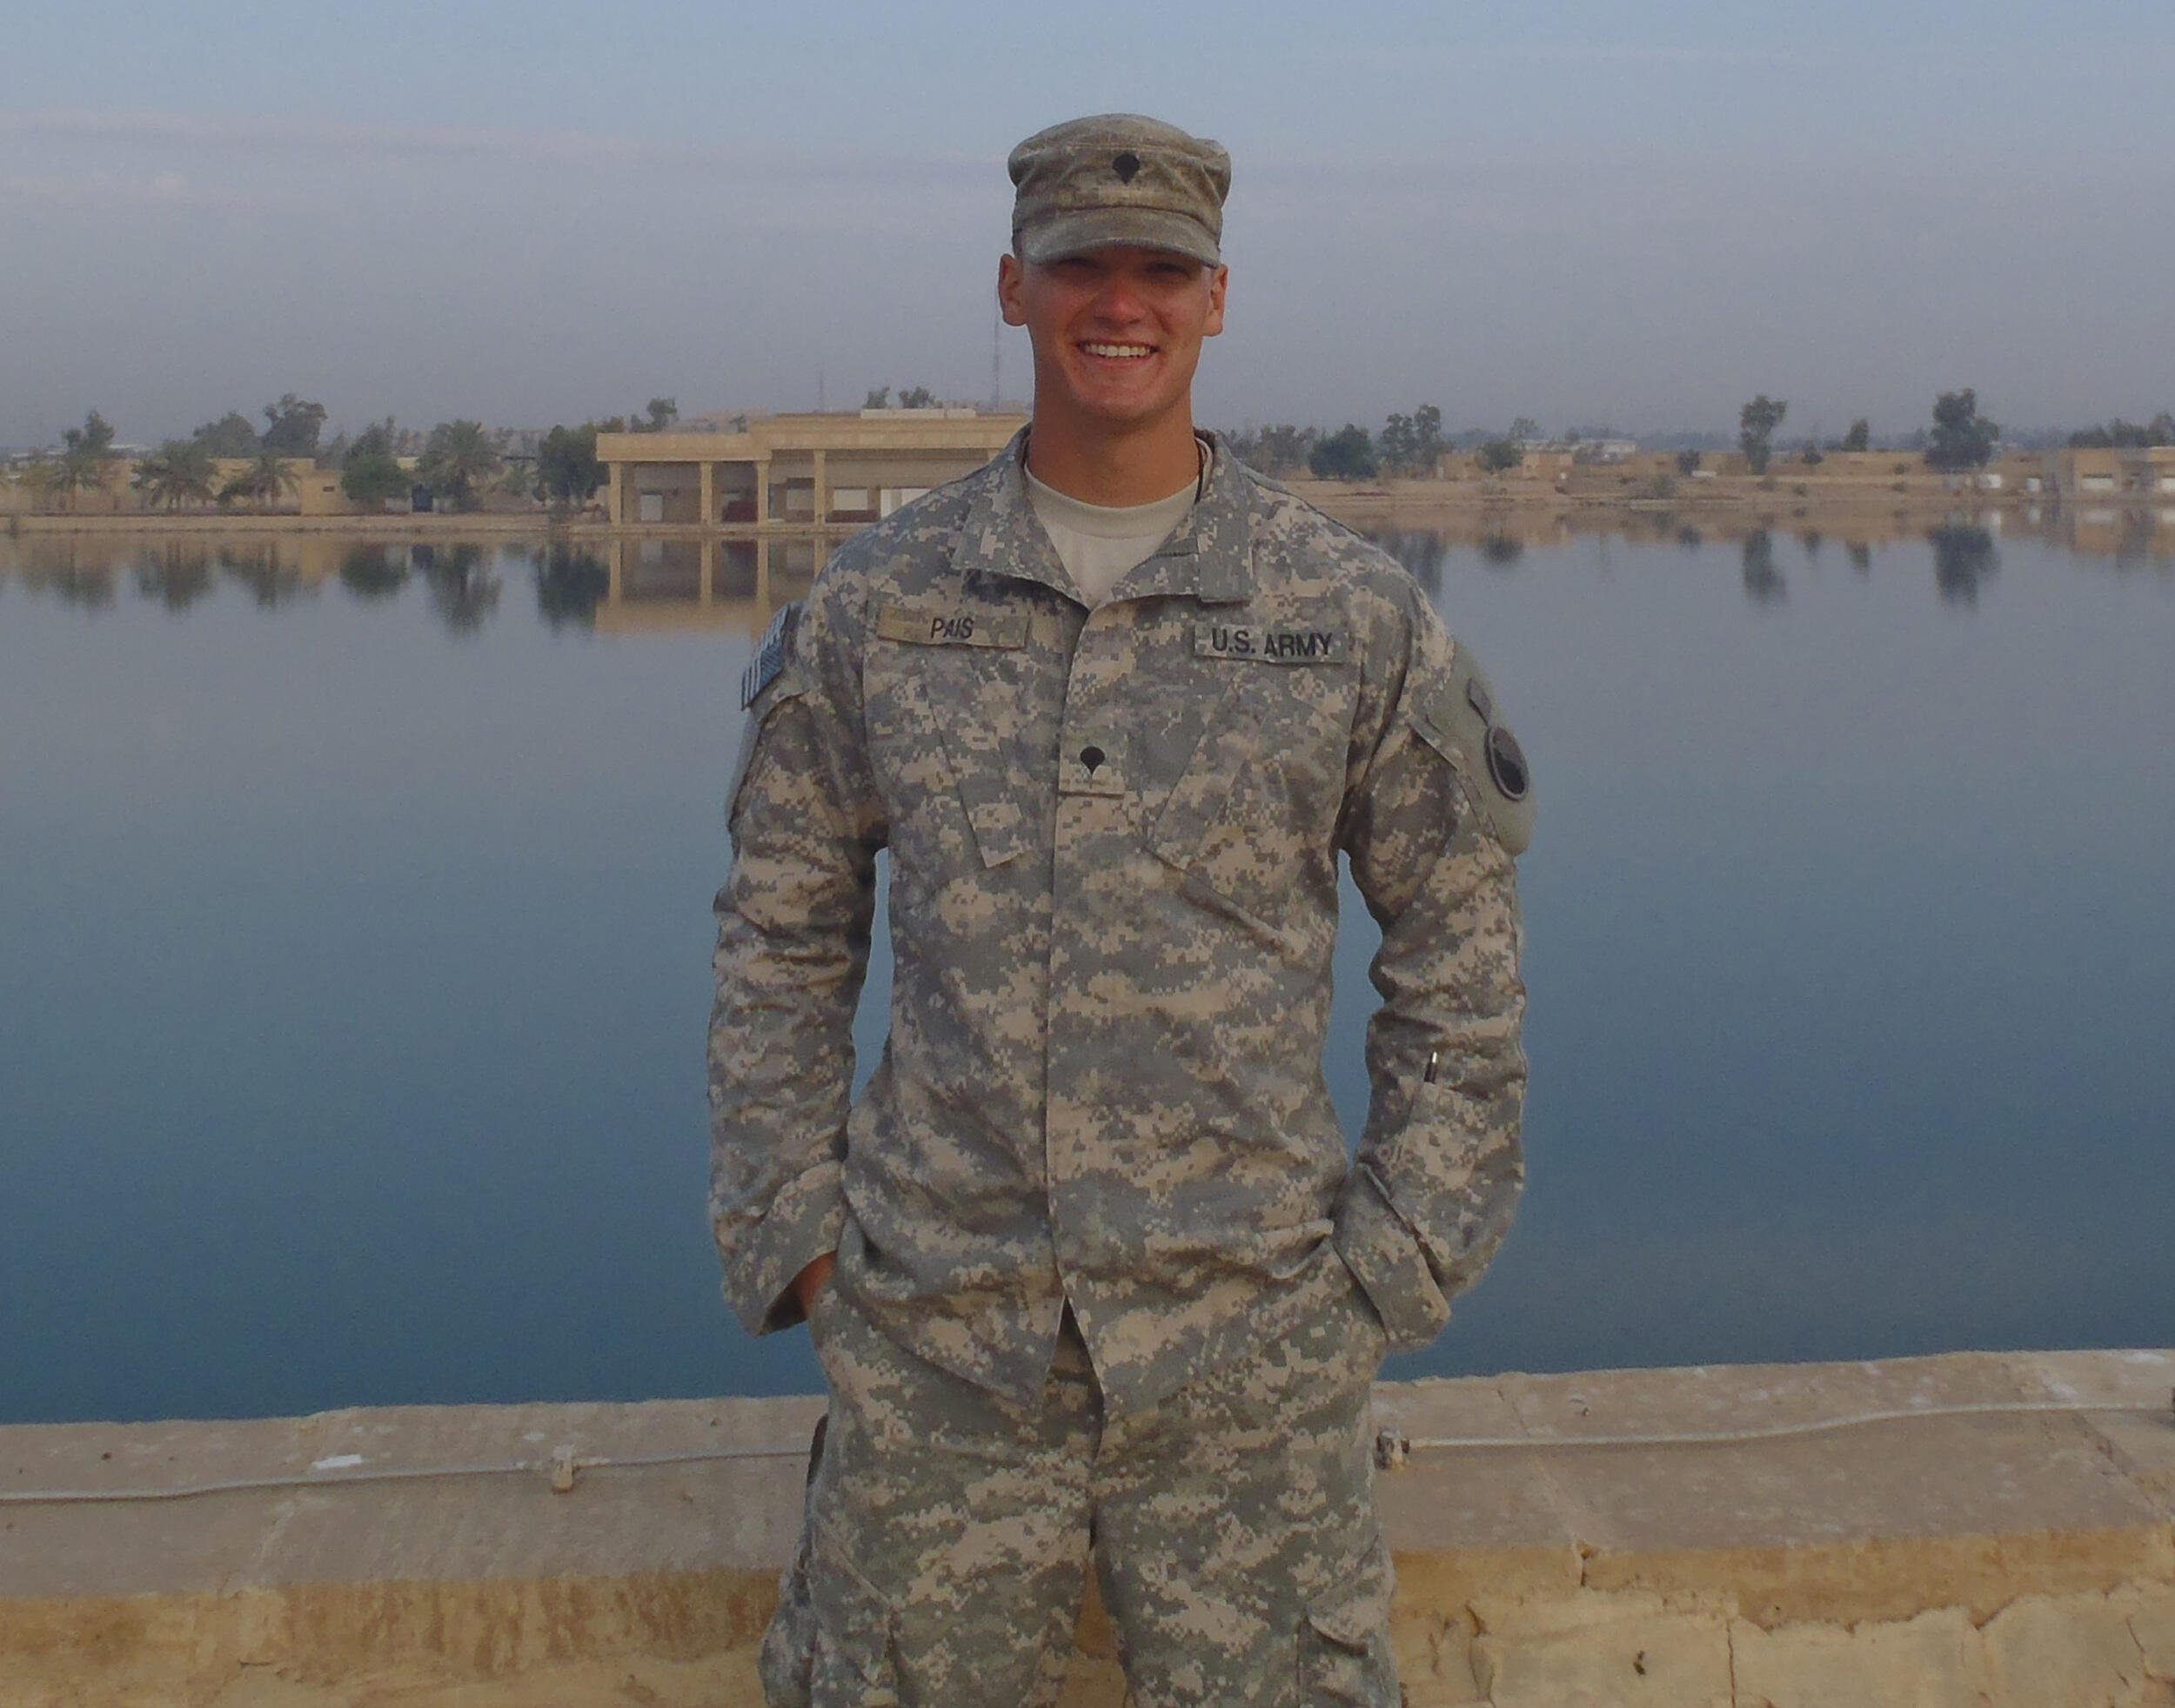 Chris in military uniform in front of a palace in Iraq.